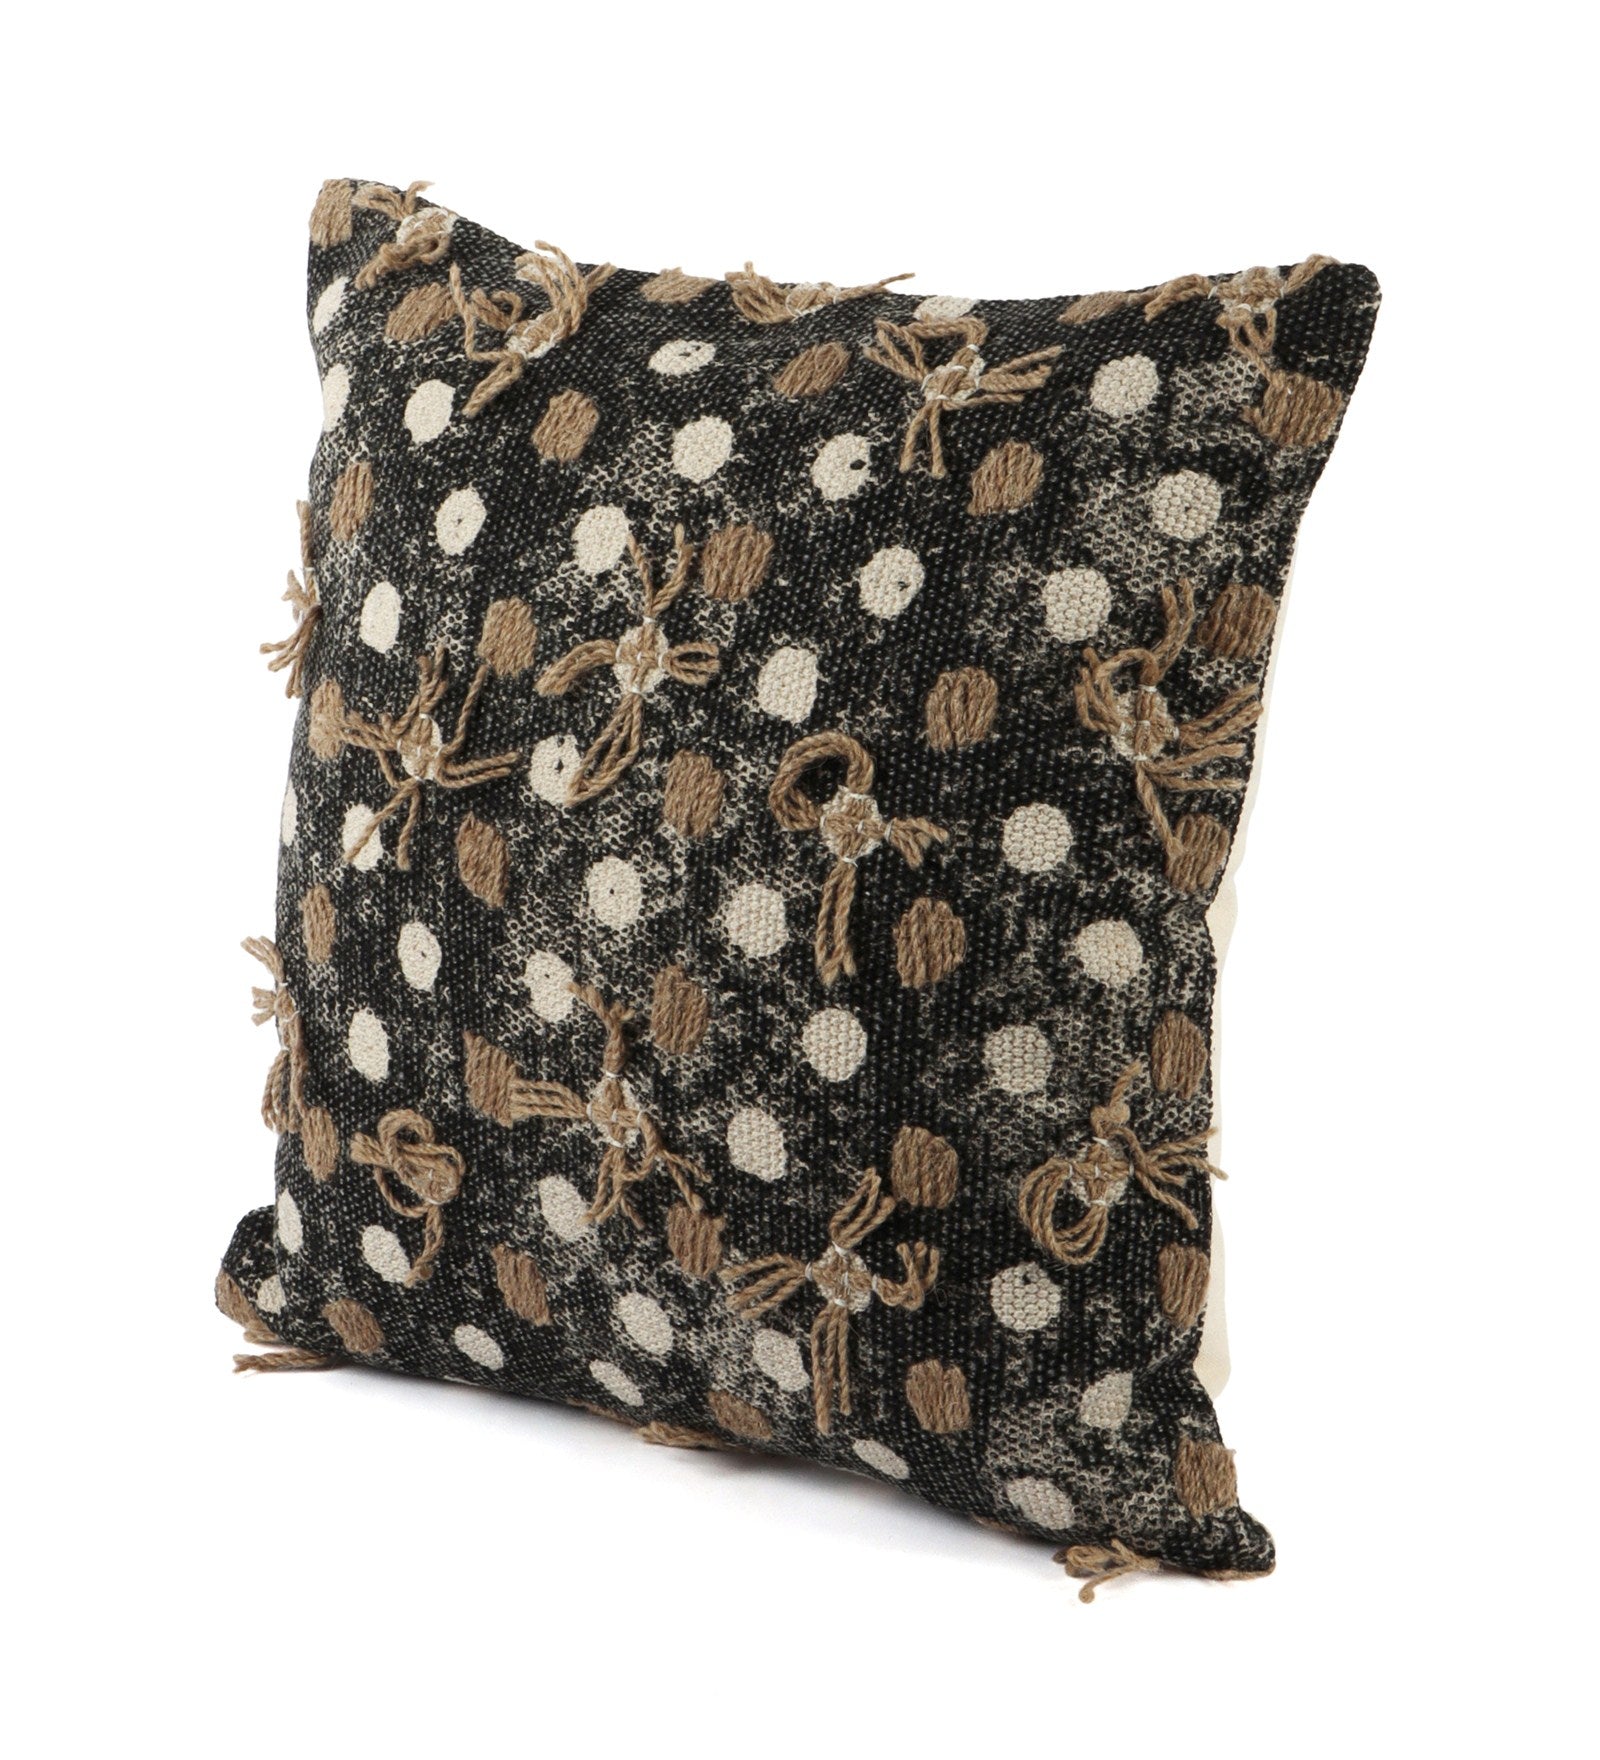 Embroidered Contemporary Cushion Cover (Beige-Black Polka Dots)